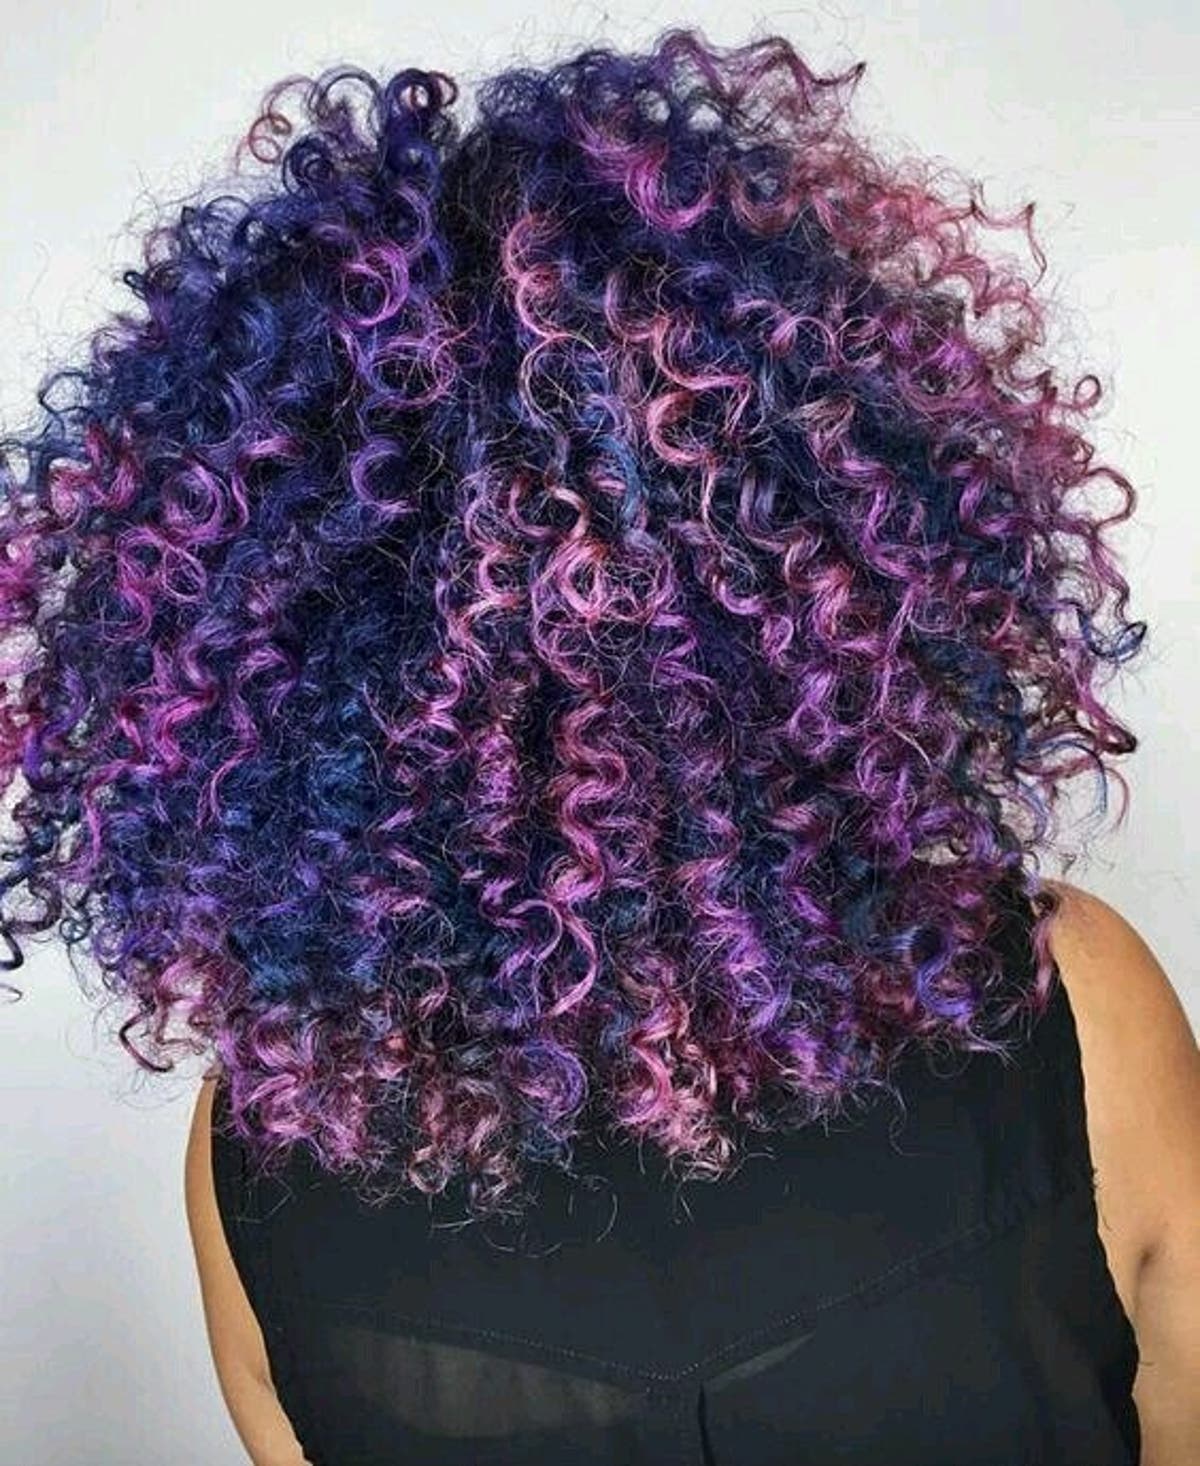 10 Best Cute Beautiful Hair Color Ideas For Your Curly Hair